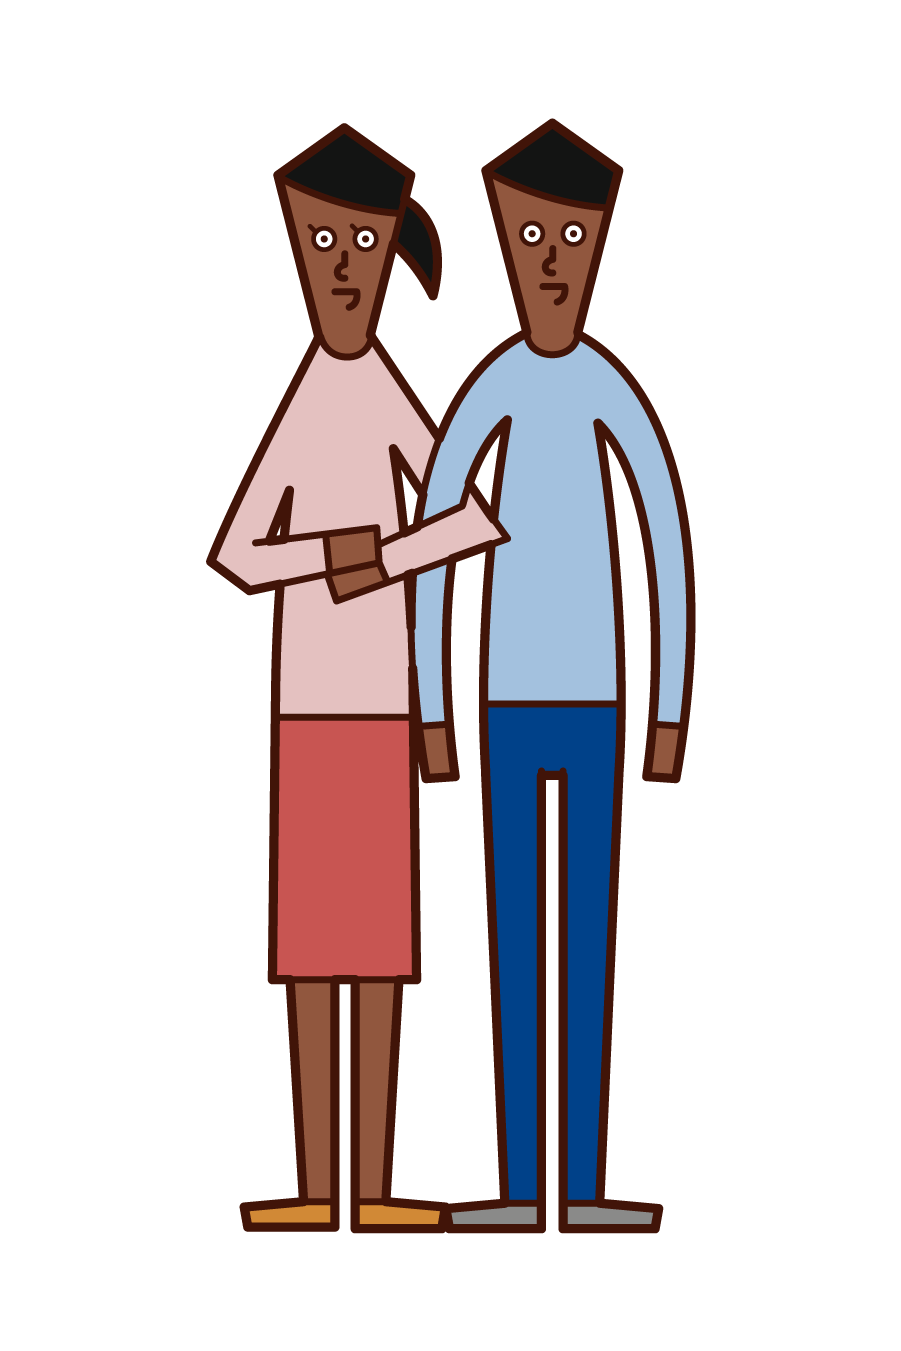 Illustration of a good couple